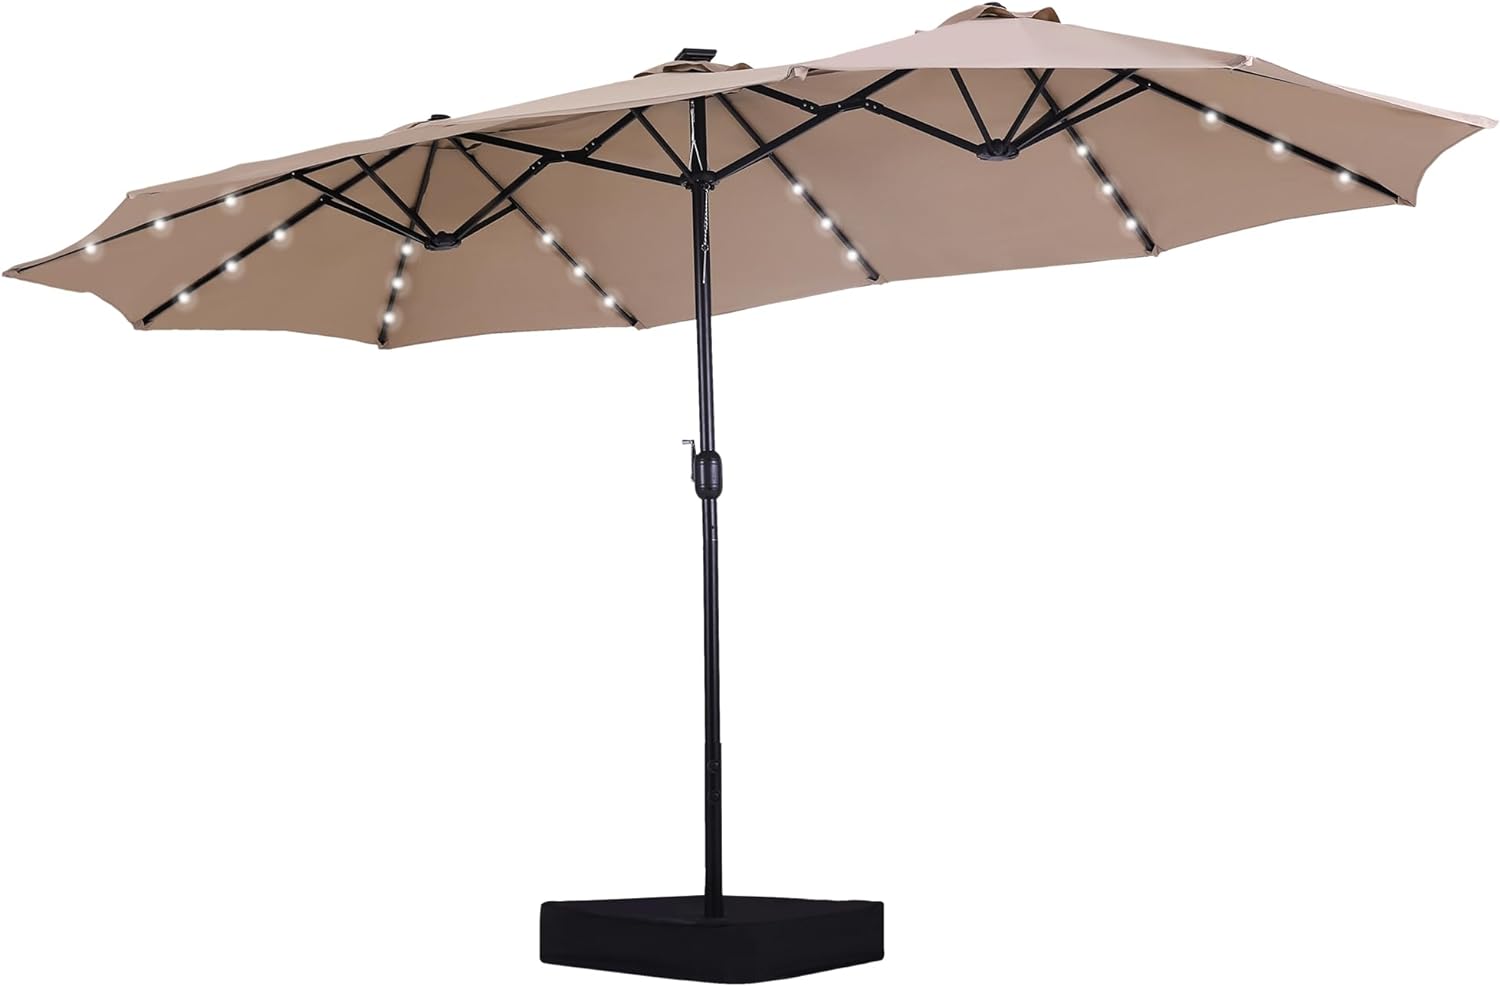 MFSTUDIO 15ft Double Sided Patio Umbrella with Solar Lights, Outdoor Large Rectangular Market Umbrellas with Base Included, Crank Handle and 36 LED Lights for Deck Pool Shade